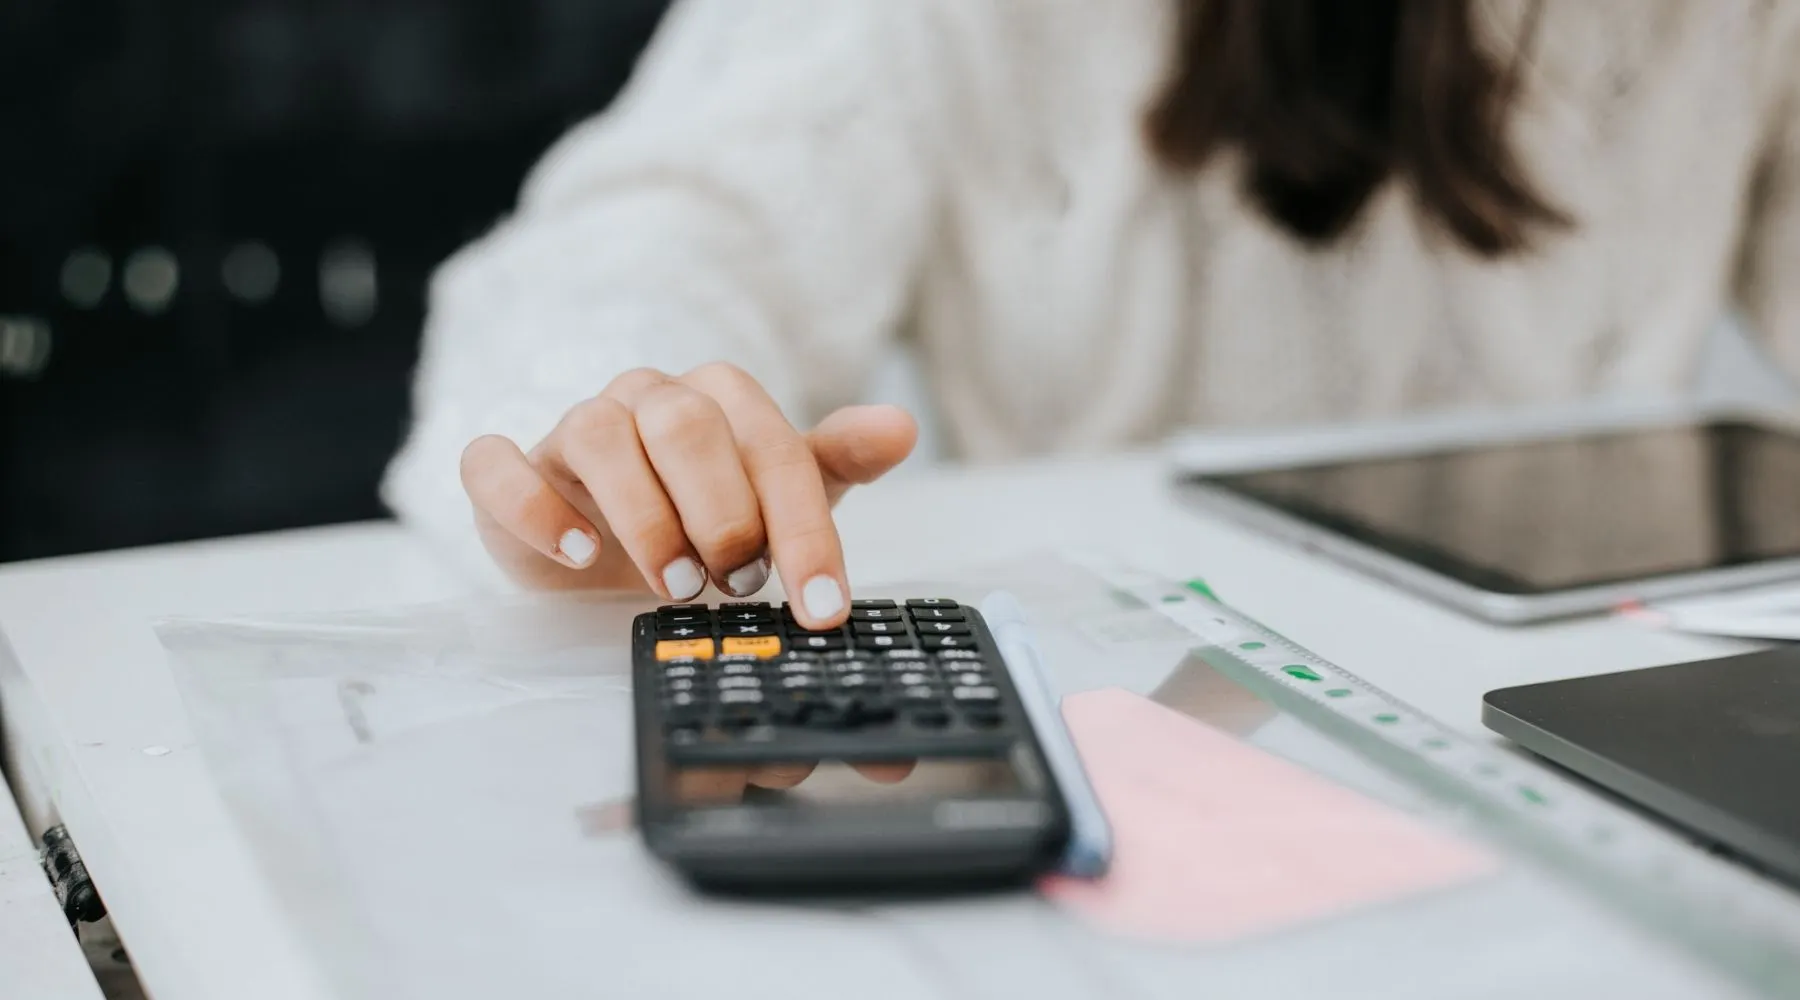 A young woman uses a calculator.